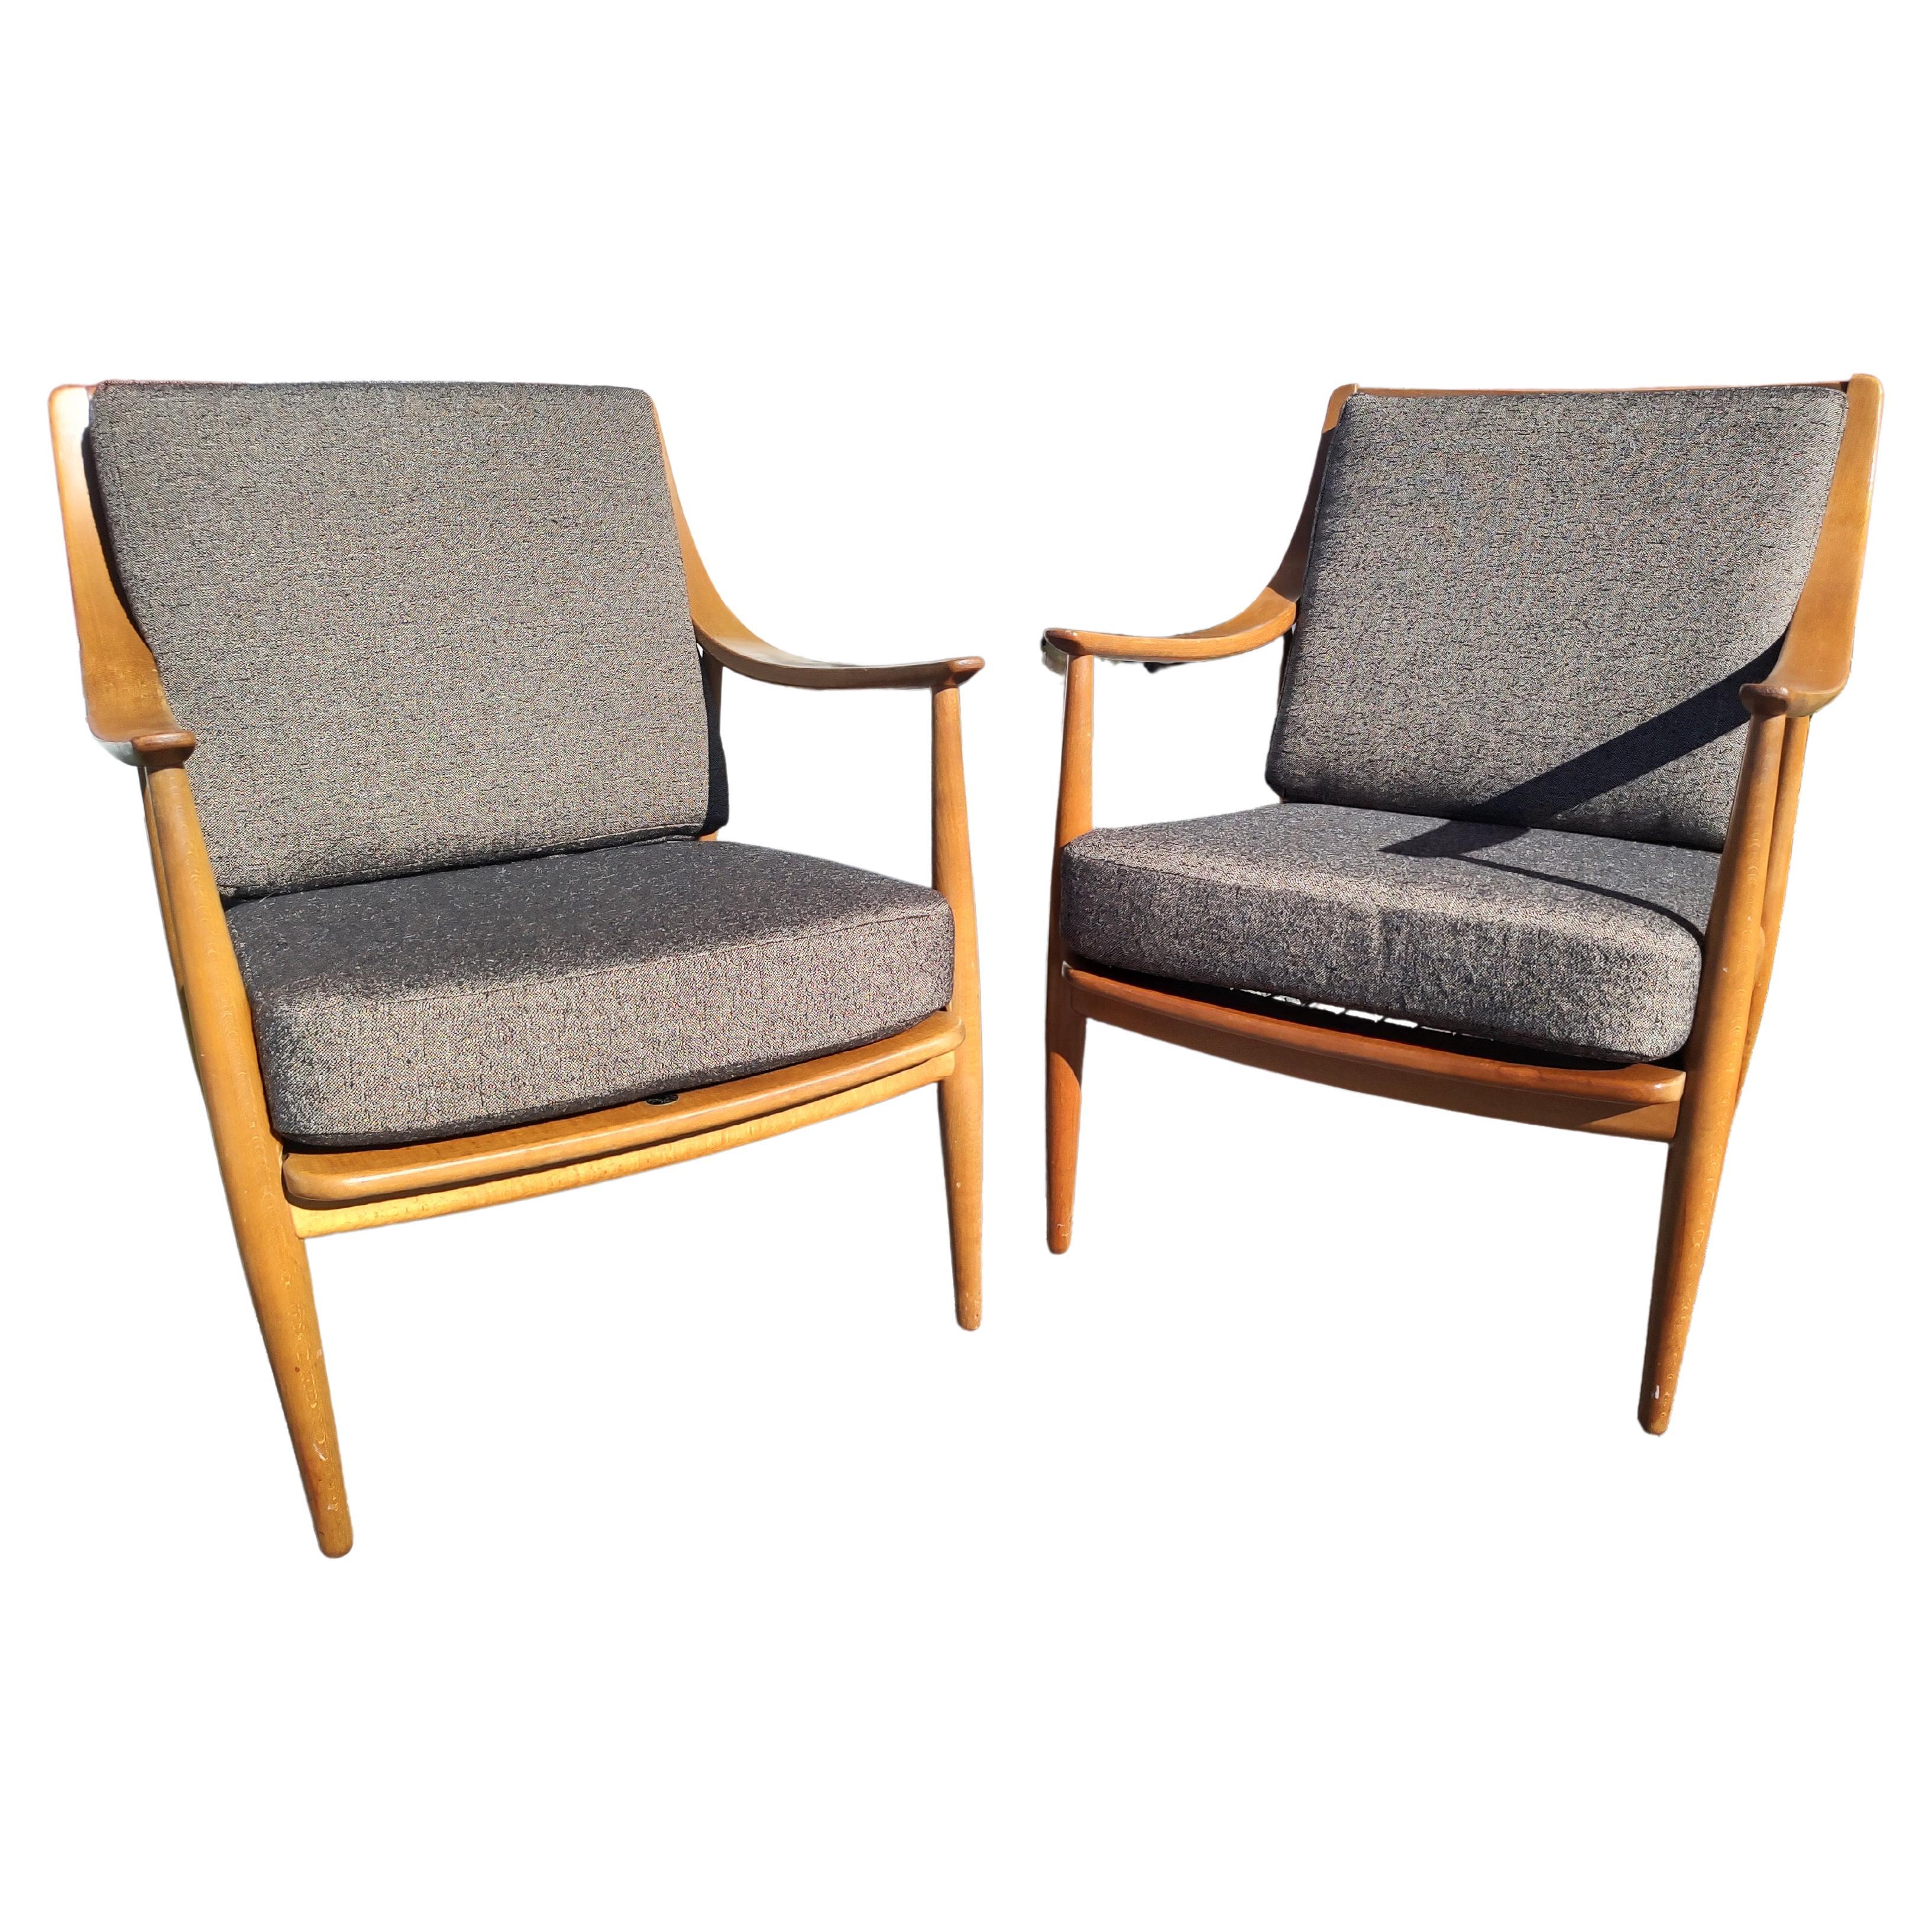 Hand-Crafted Pair of Mid-Century Modern Lounge Chairs by Peter Hvidt & Olga Molgaard Neilson  For Sale